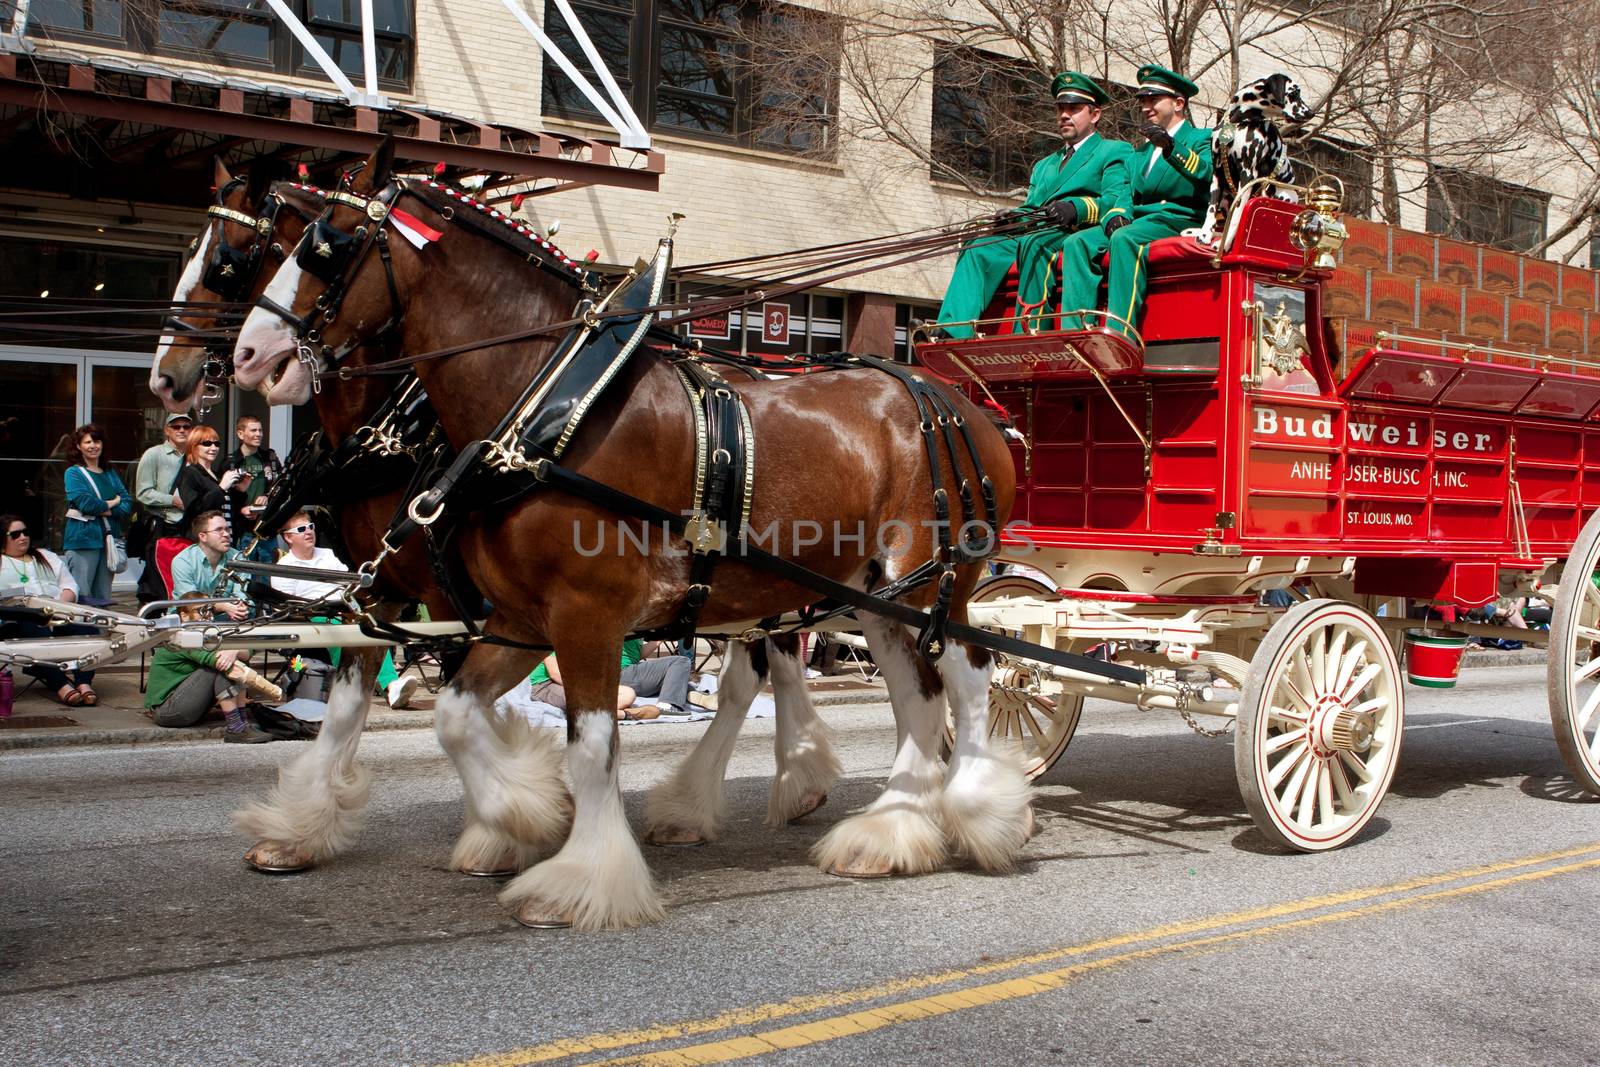 Atlanta, GA, USA - March 15, 2014:  The famous Budweiser Clydesdales move down Peachtree Street in the St. Patrick's parade.